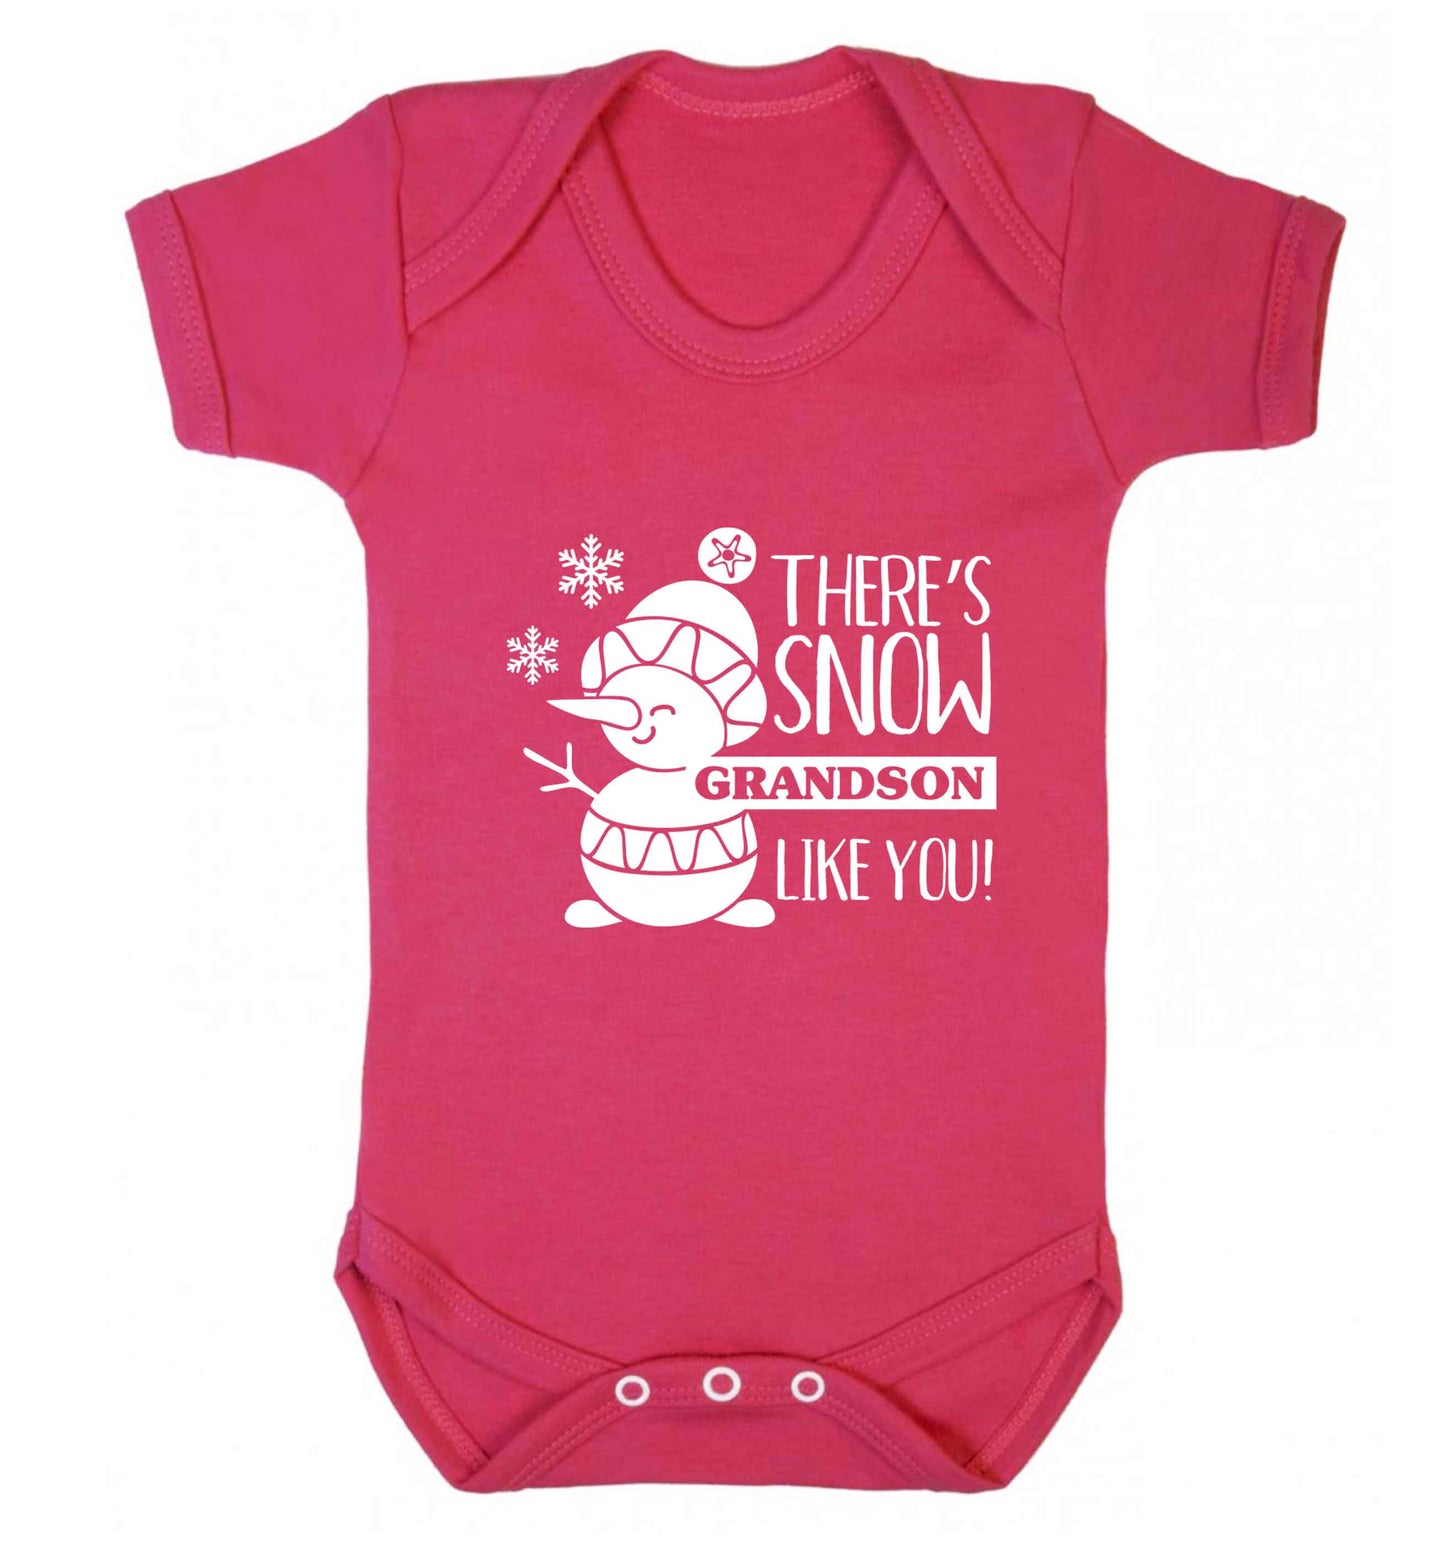 There's snow grandson like you baby vest dark pink 18-24 months